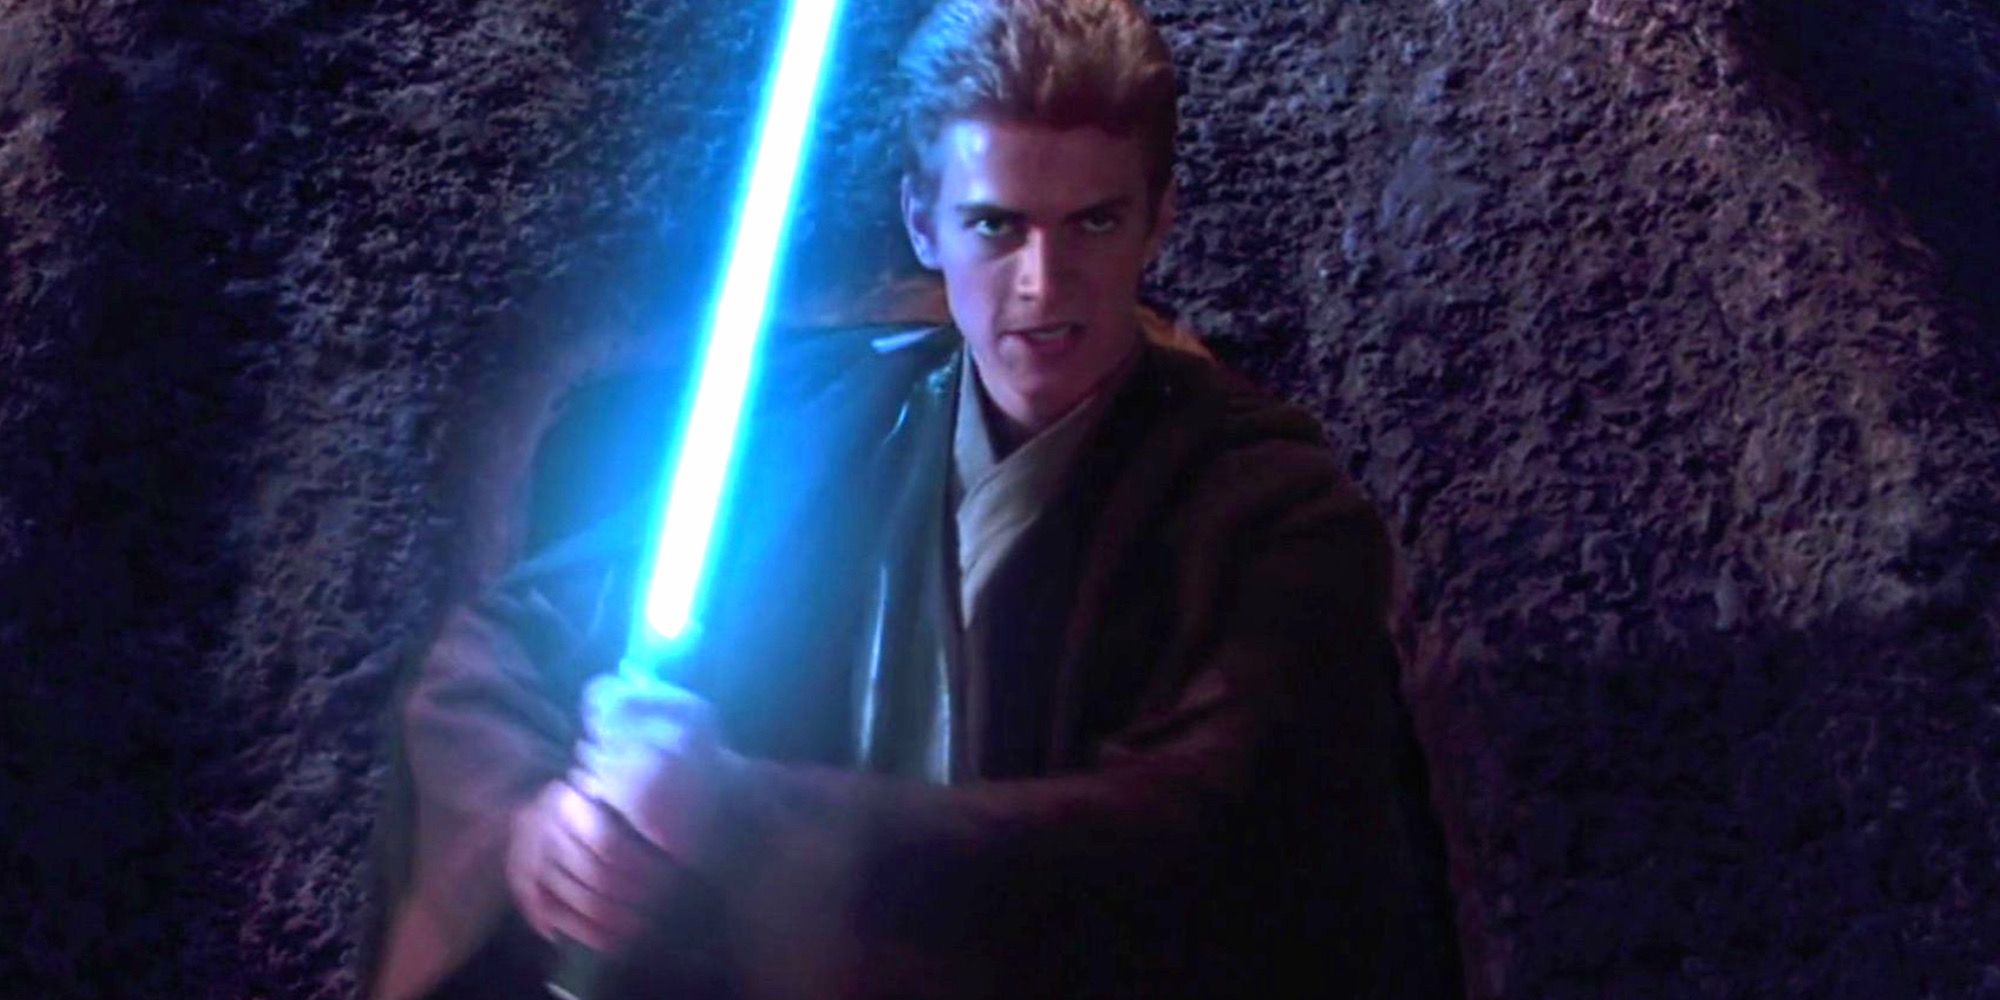 Anakin Skywalker prepares to slaughter the Tusken Raiders in Attack of the Clones